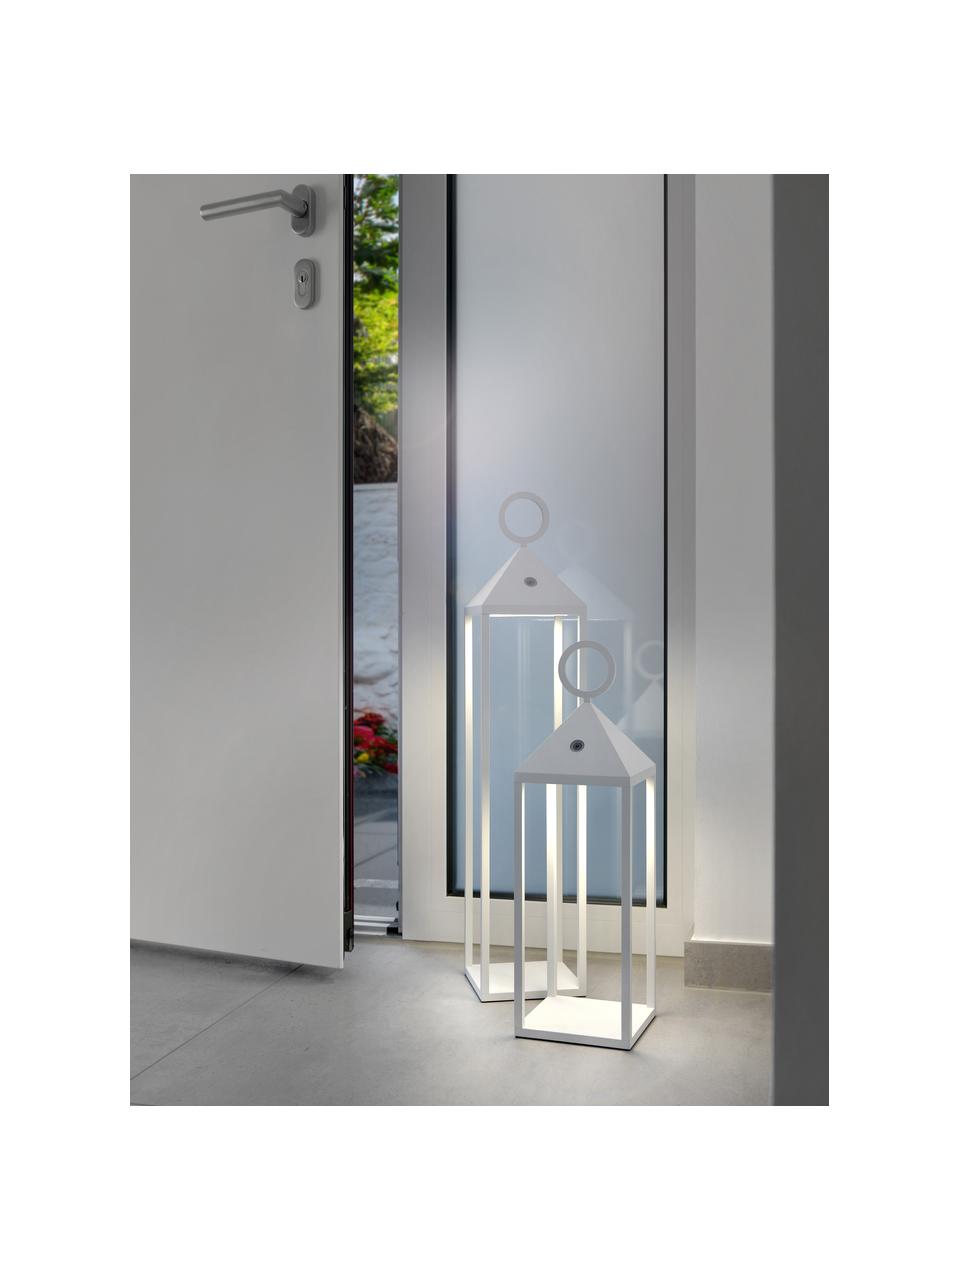 Mobiele dimbare LED outdoor lamp Cargo, Diffuser: kunststof, Wit, B 14 x H 67 cm